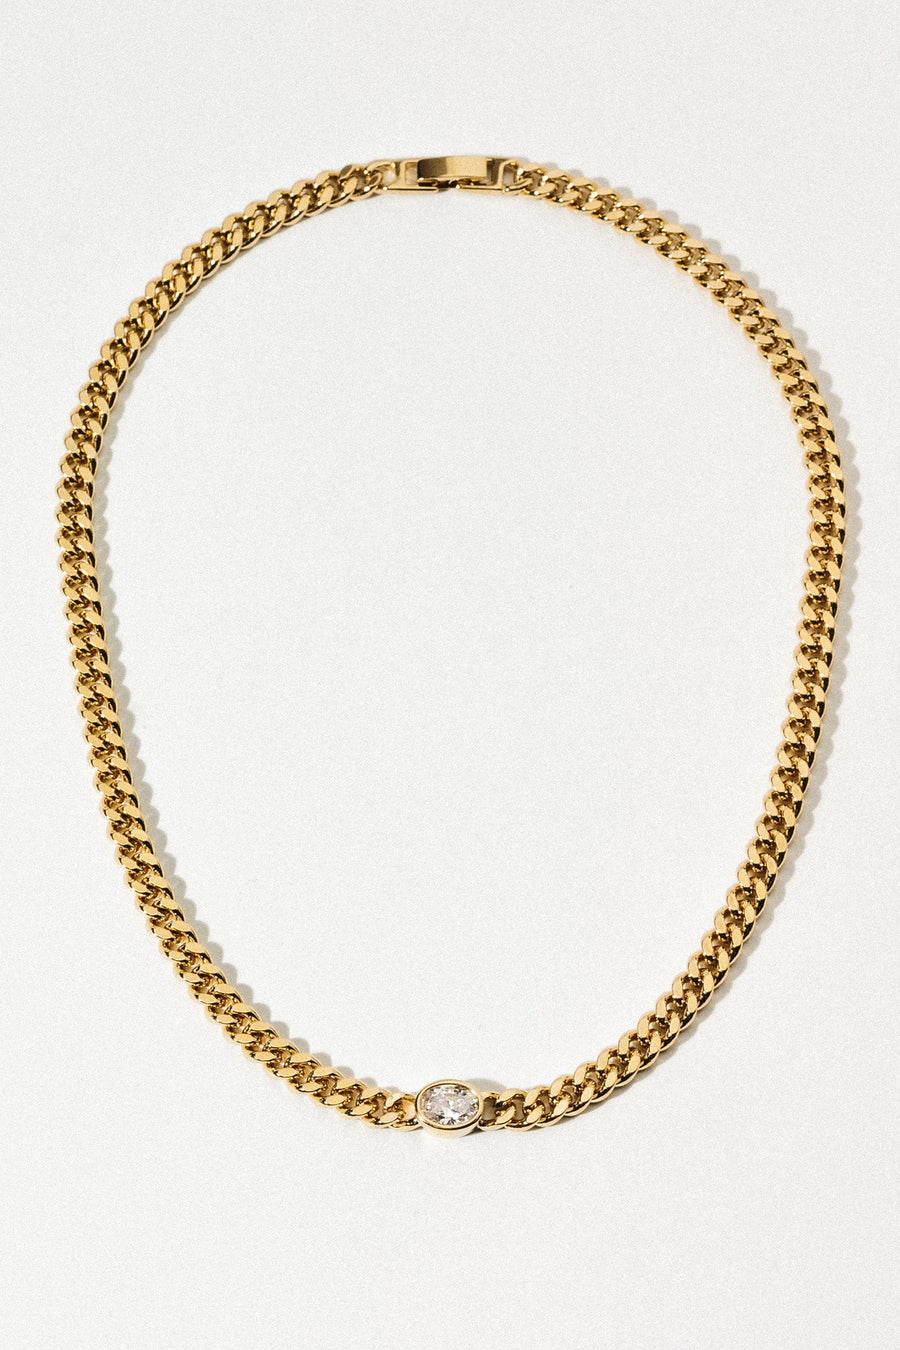 Goddess Jewelry Gold / 15 Inches Nicolette Chain Necklace